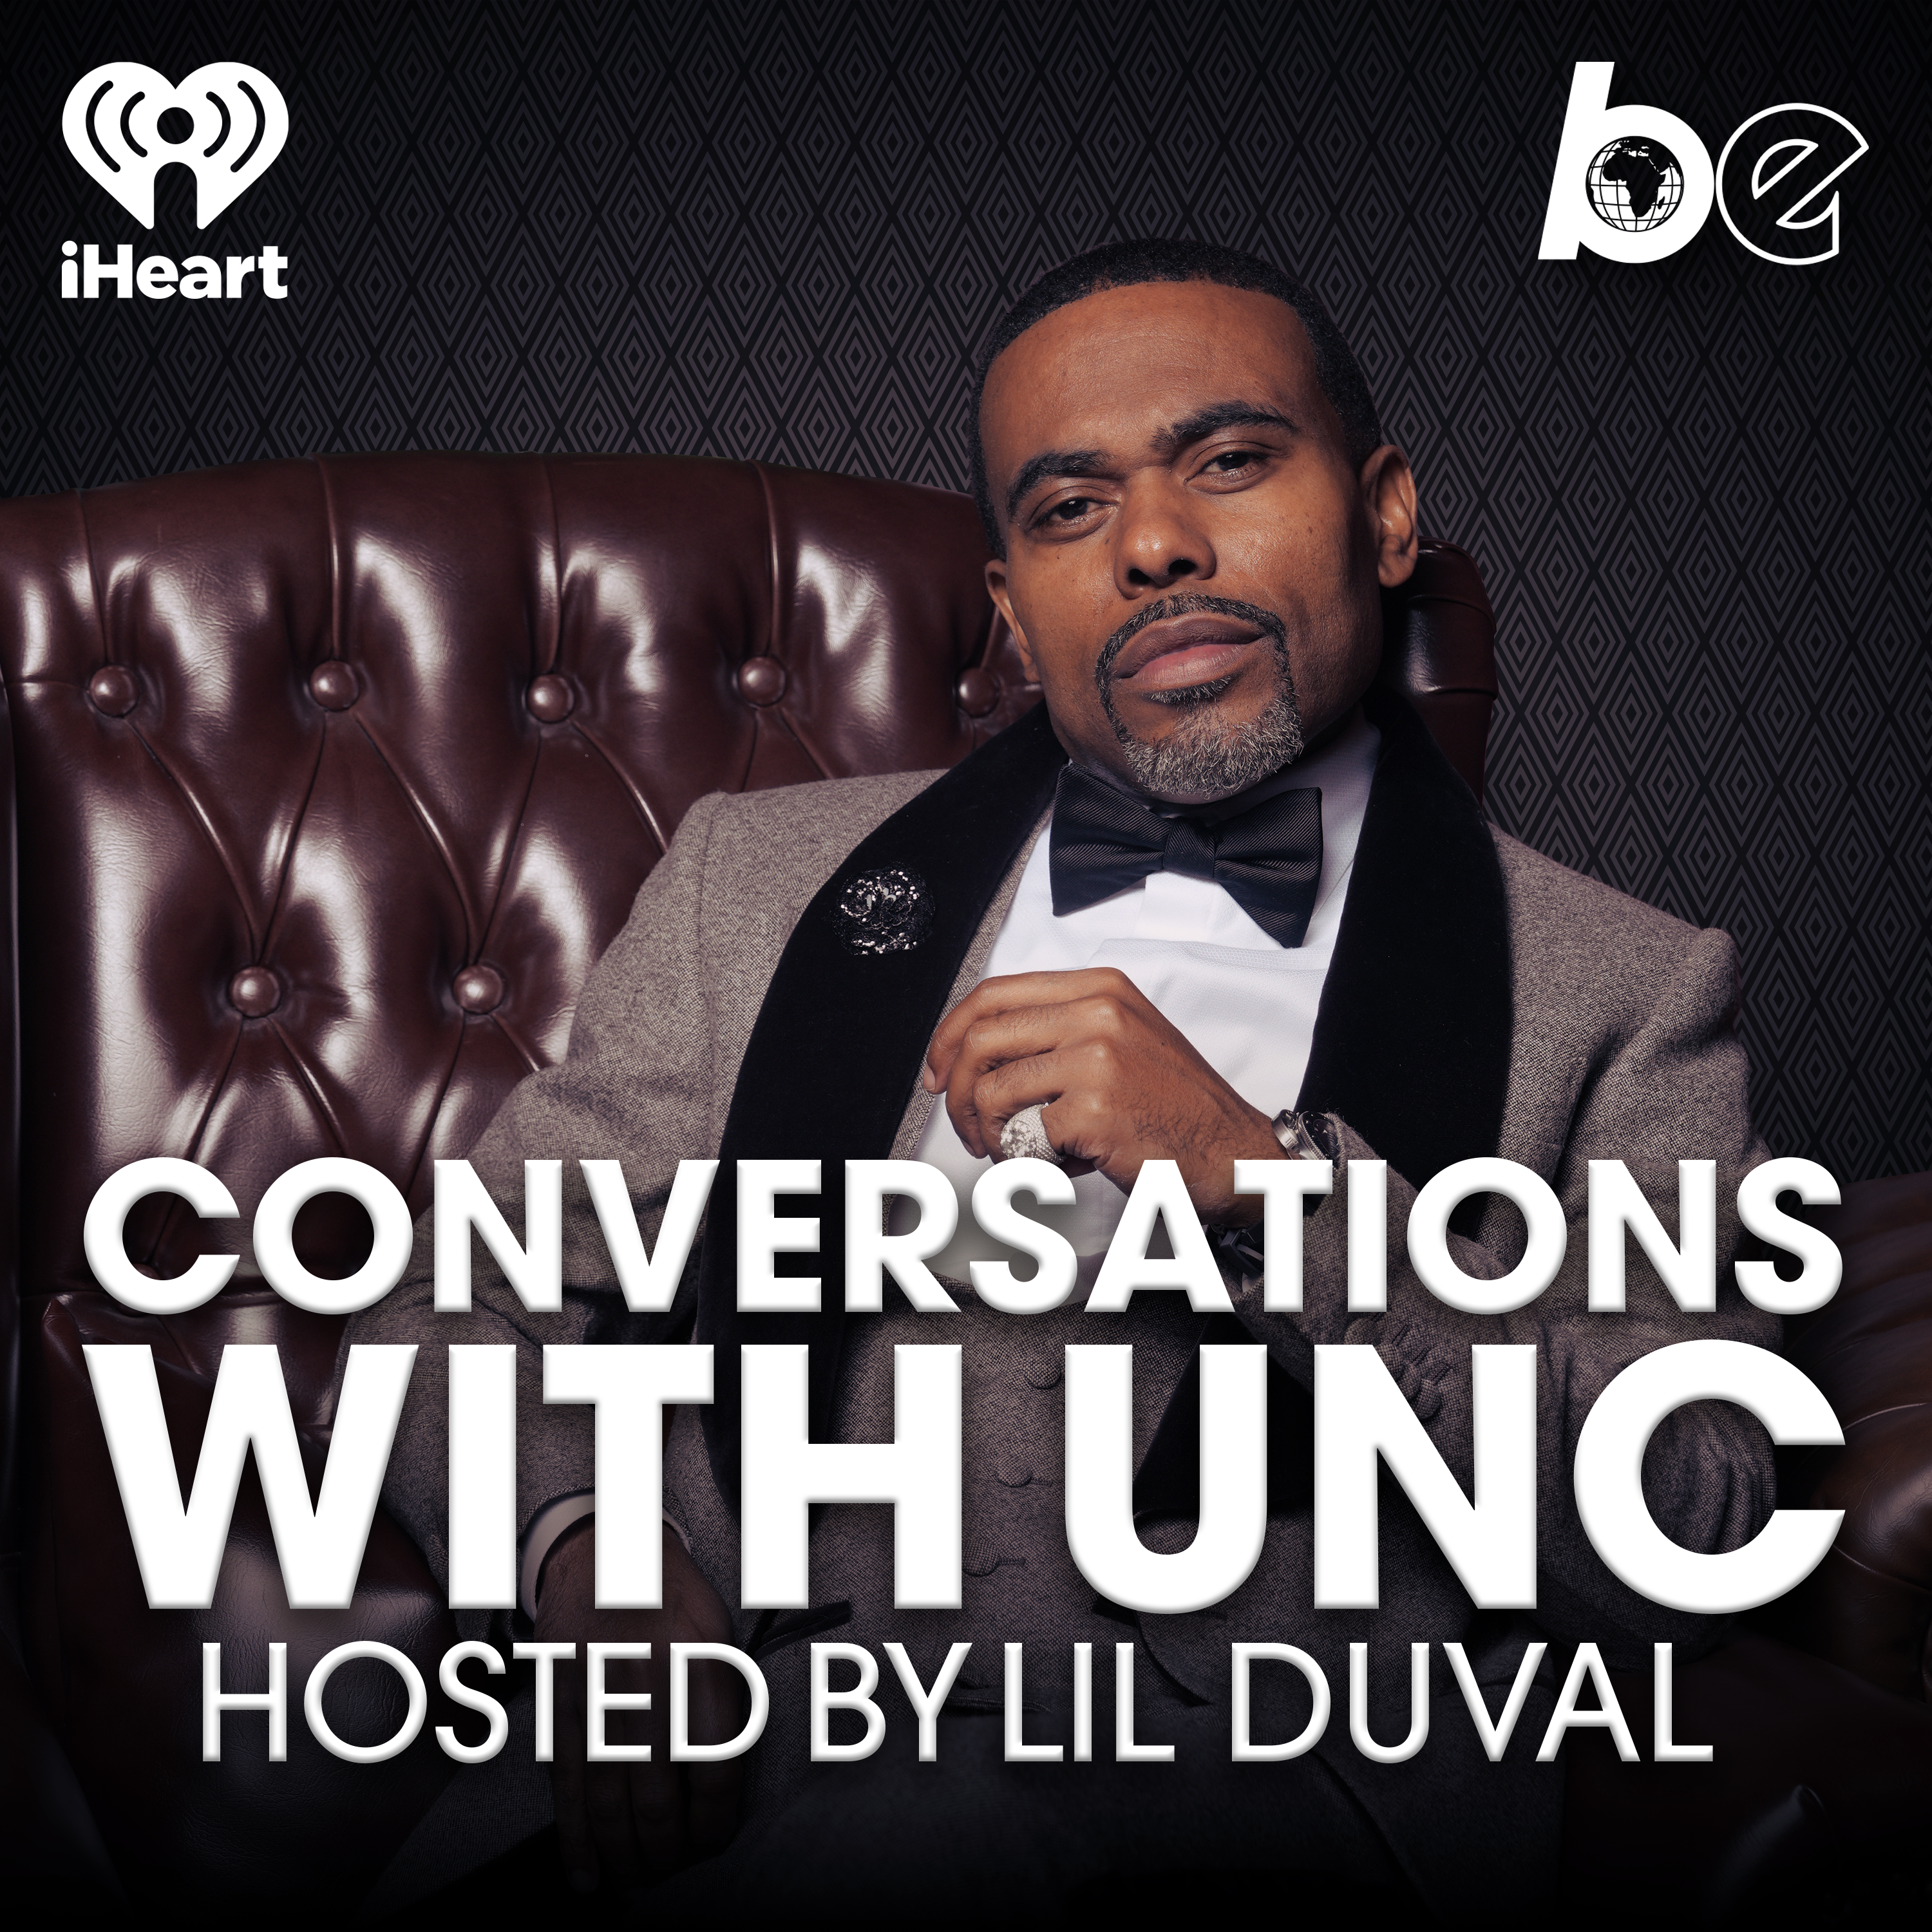 Introducing: Conversations with Unc, Hosted by Lil Duval